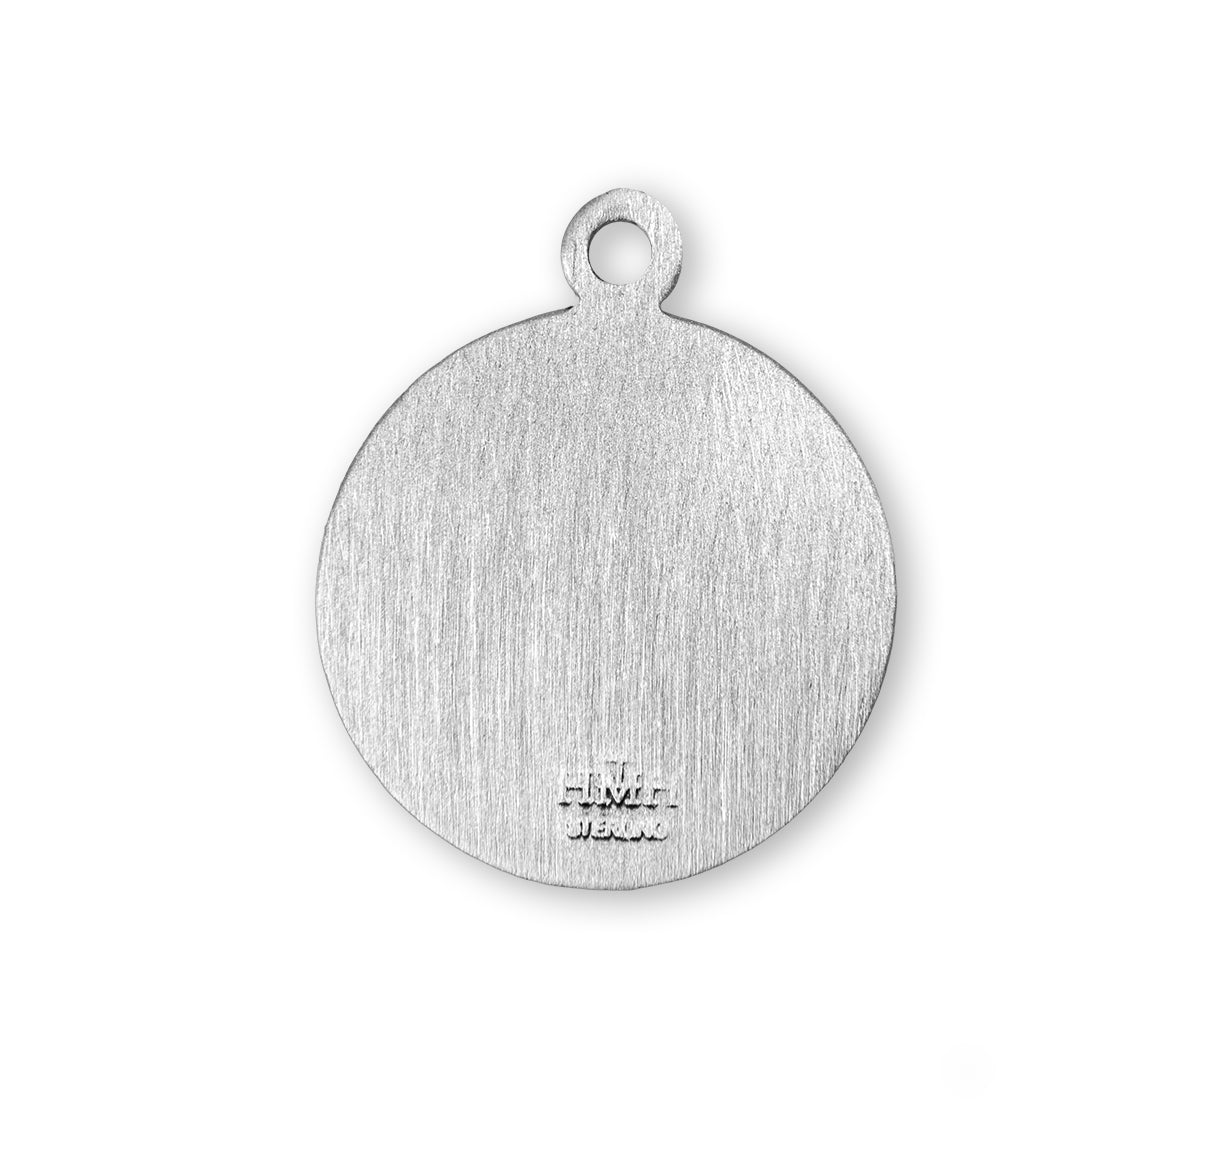 St. Zachary Sterling Silver Medal Necklace